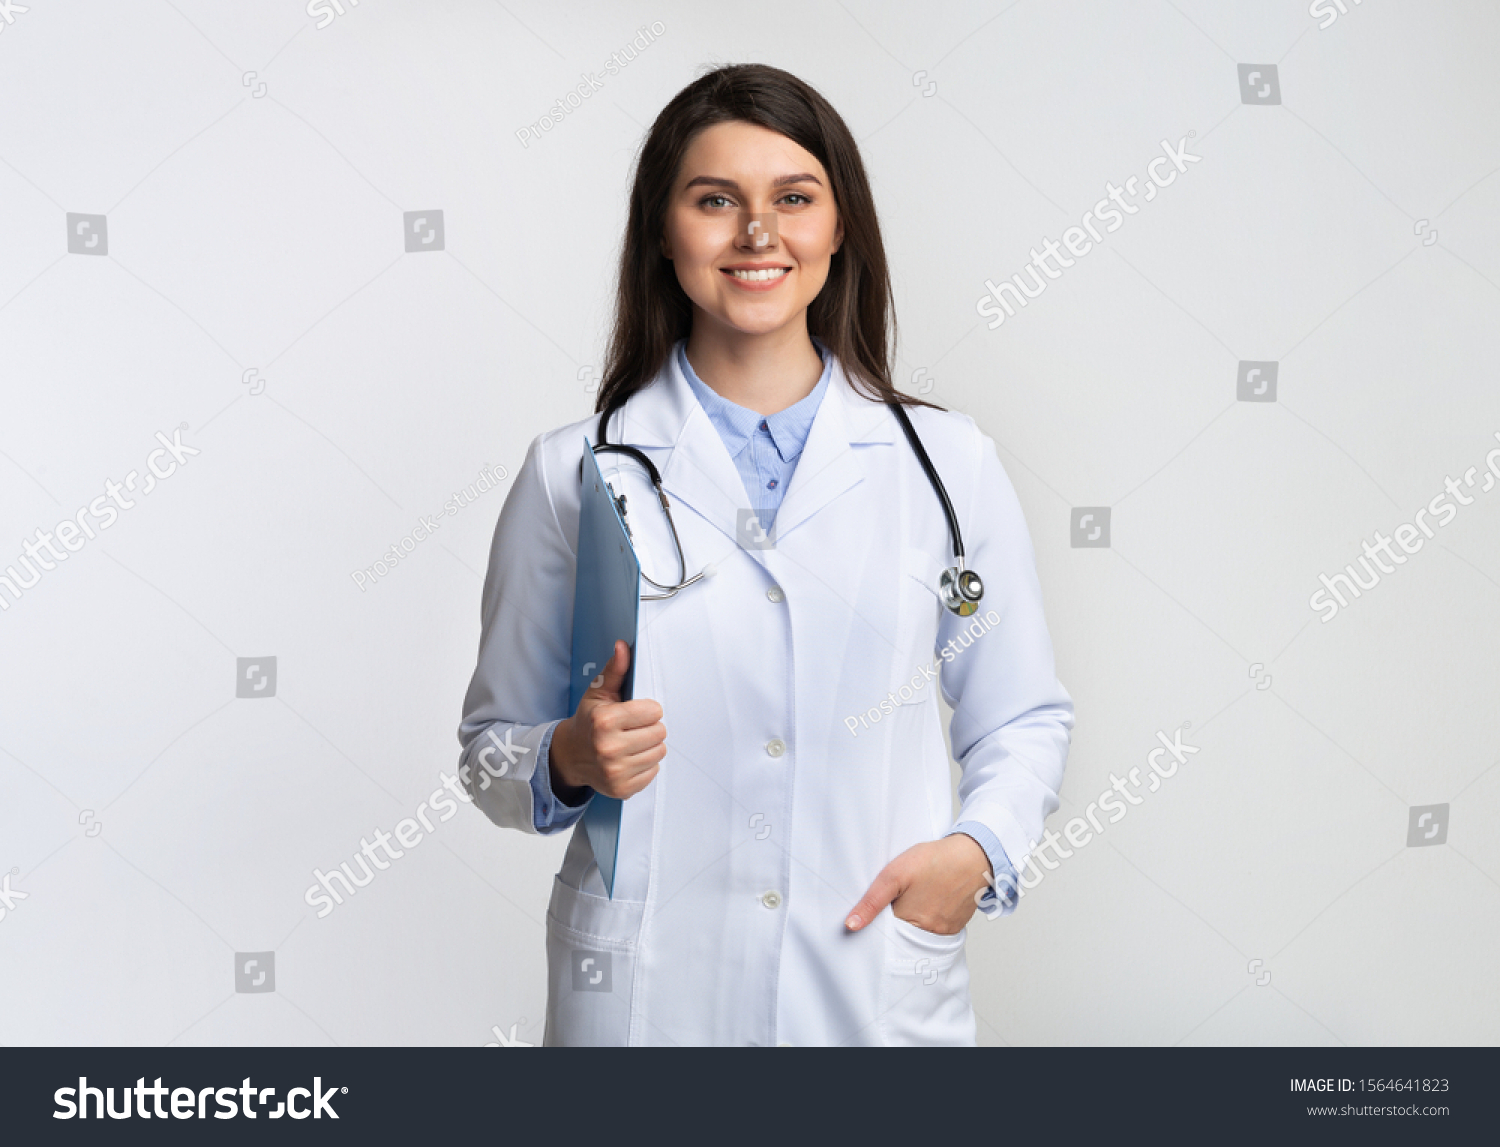 Doctor. Positive Therapist Lady Smiling At Camera Holding Folder Standing Over Gray Background. Studio Shot #1564641823